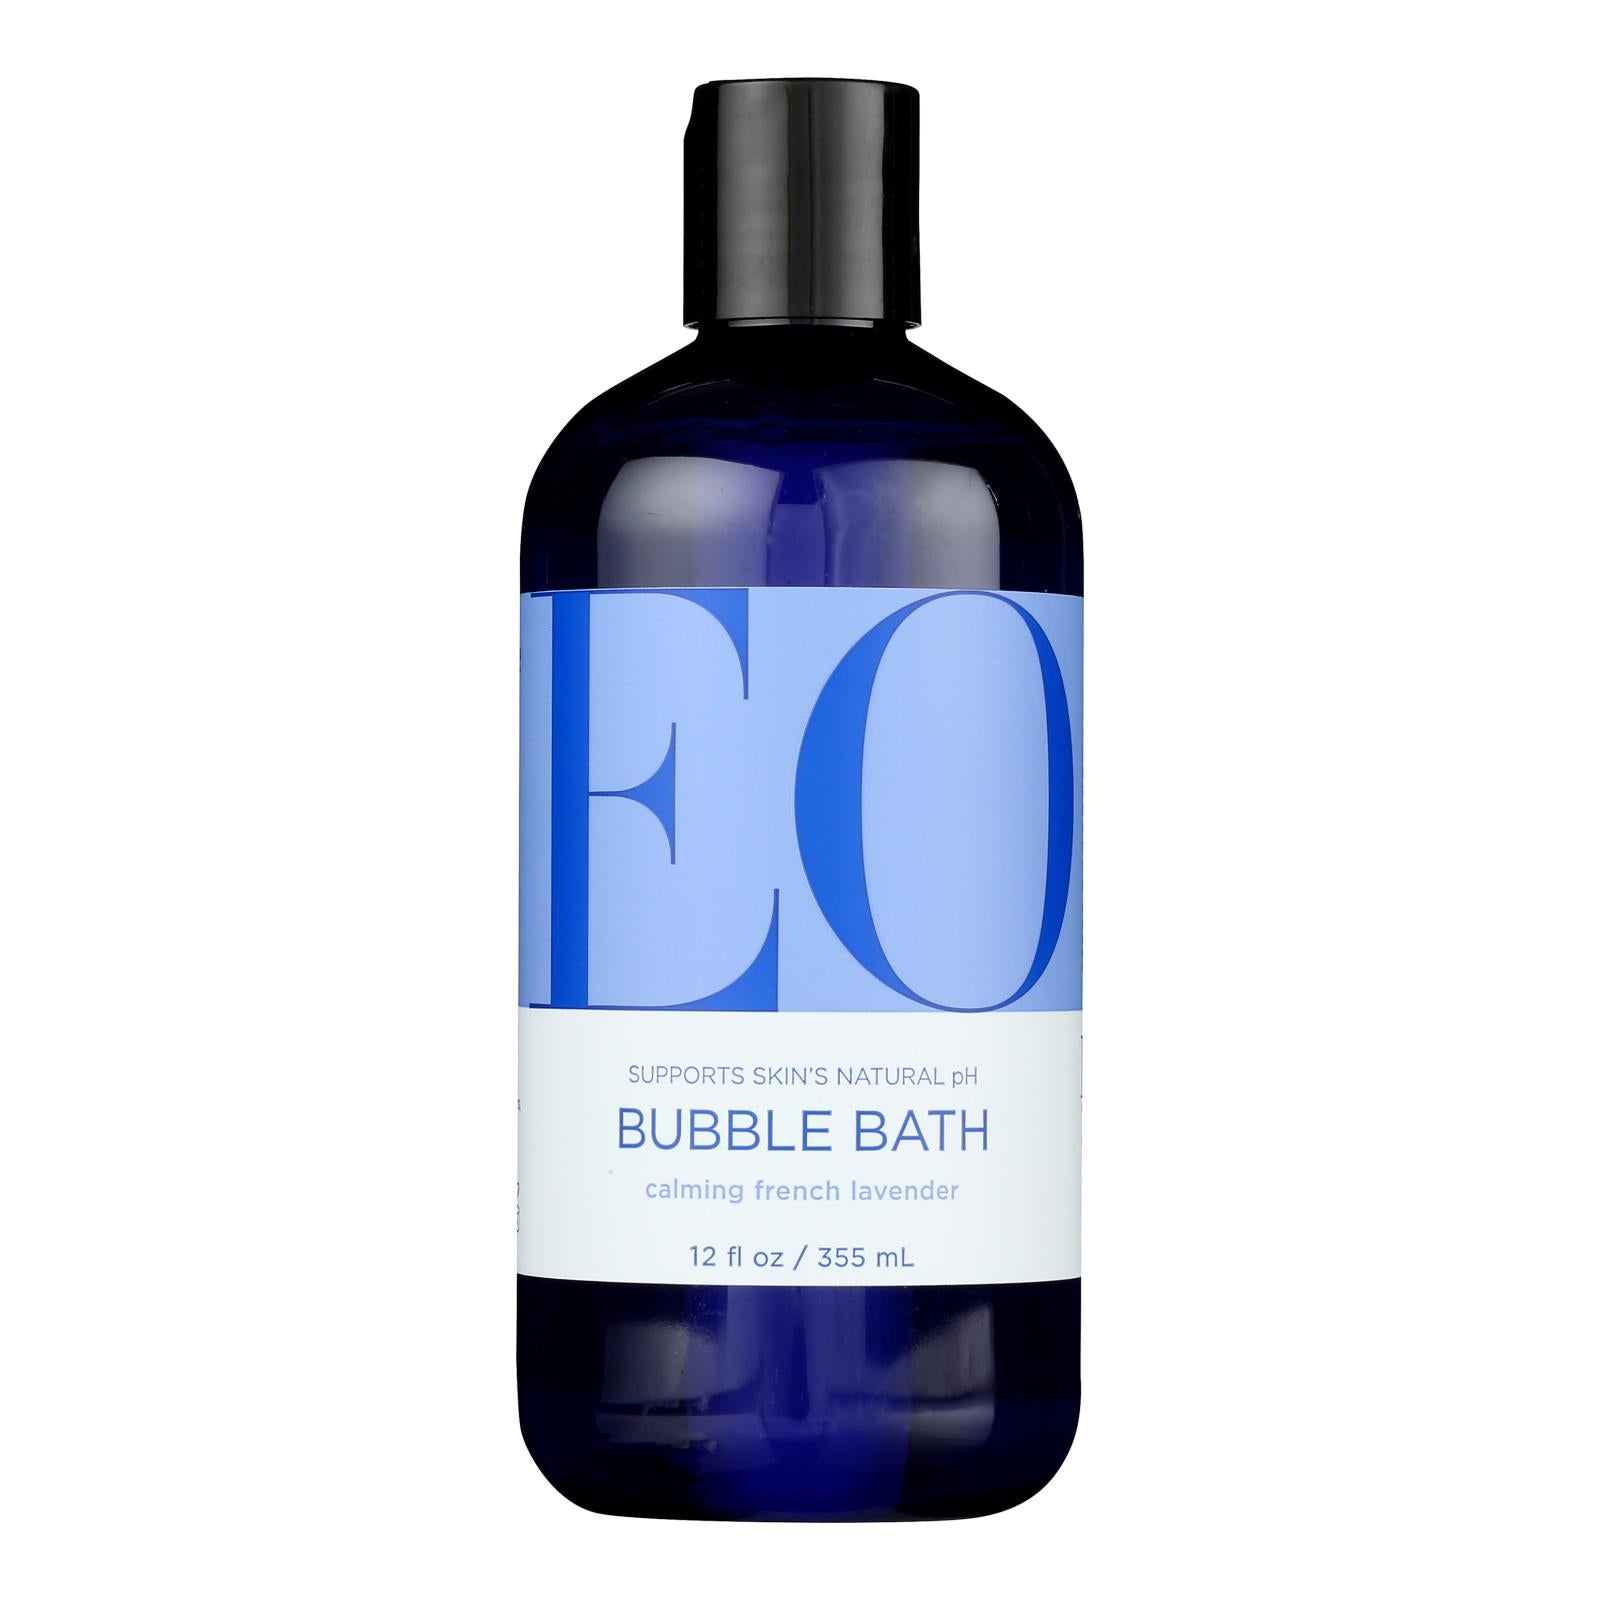 Eo Products - Bubble Bath Serenity French Lavender With Aloe - 12 Fl Oz